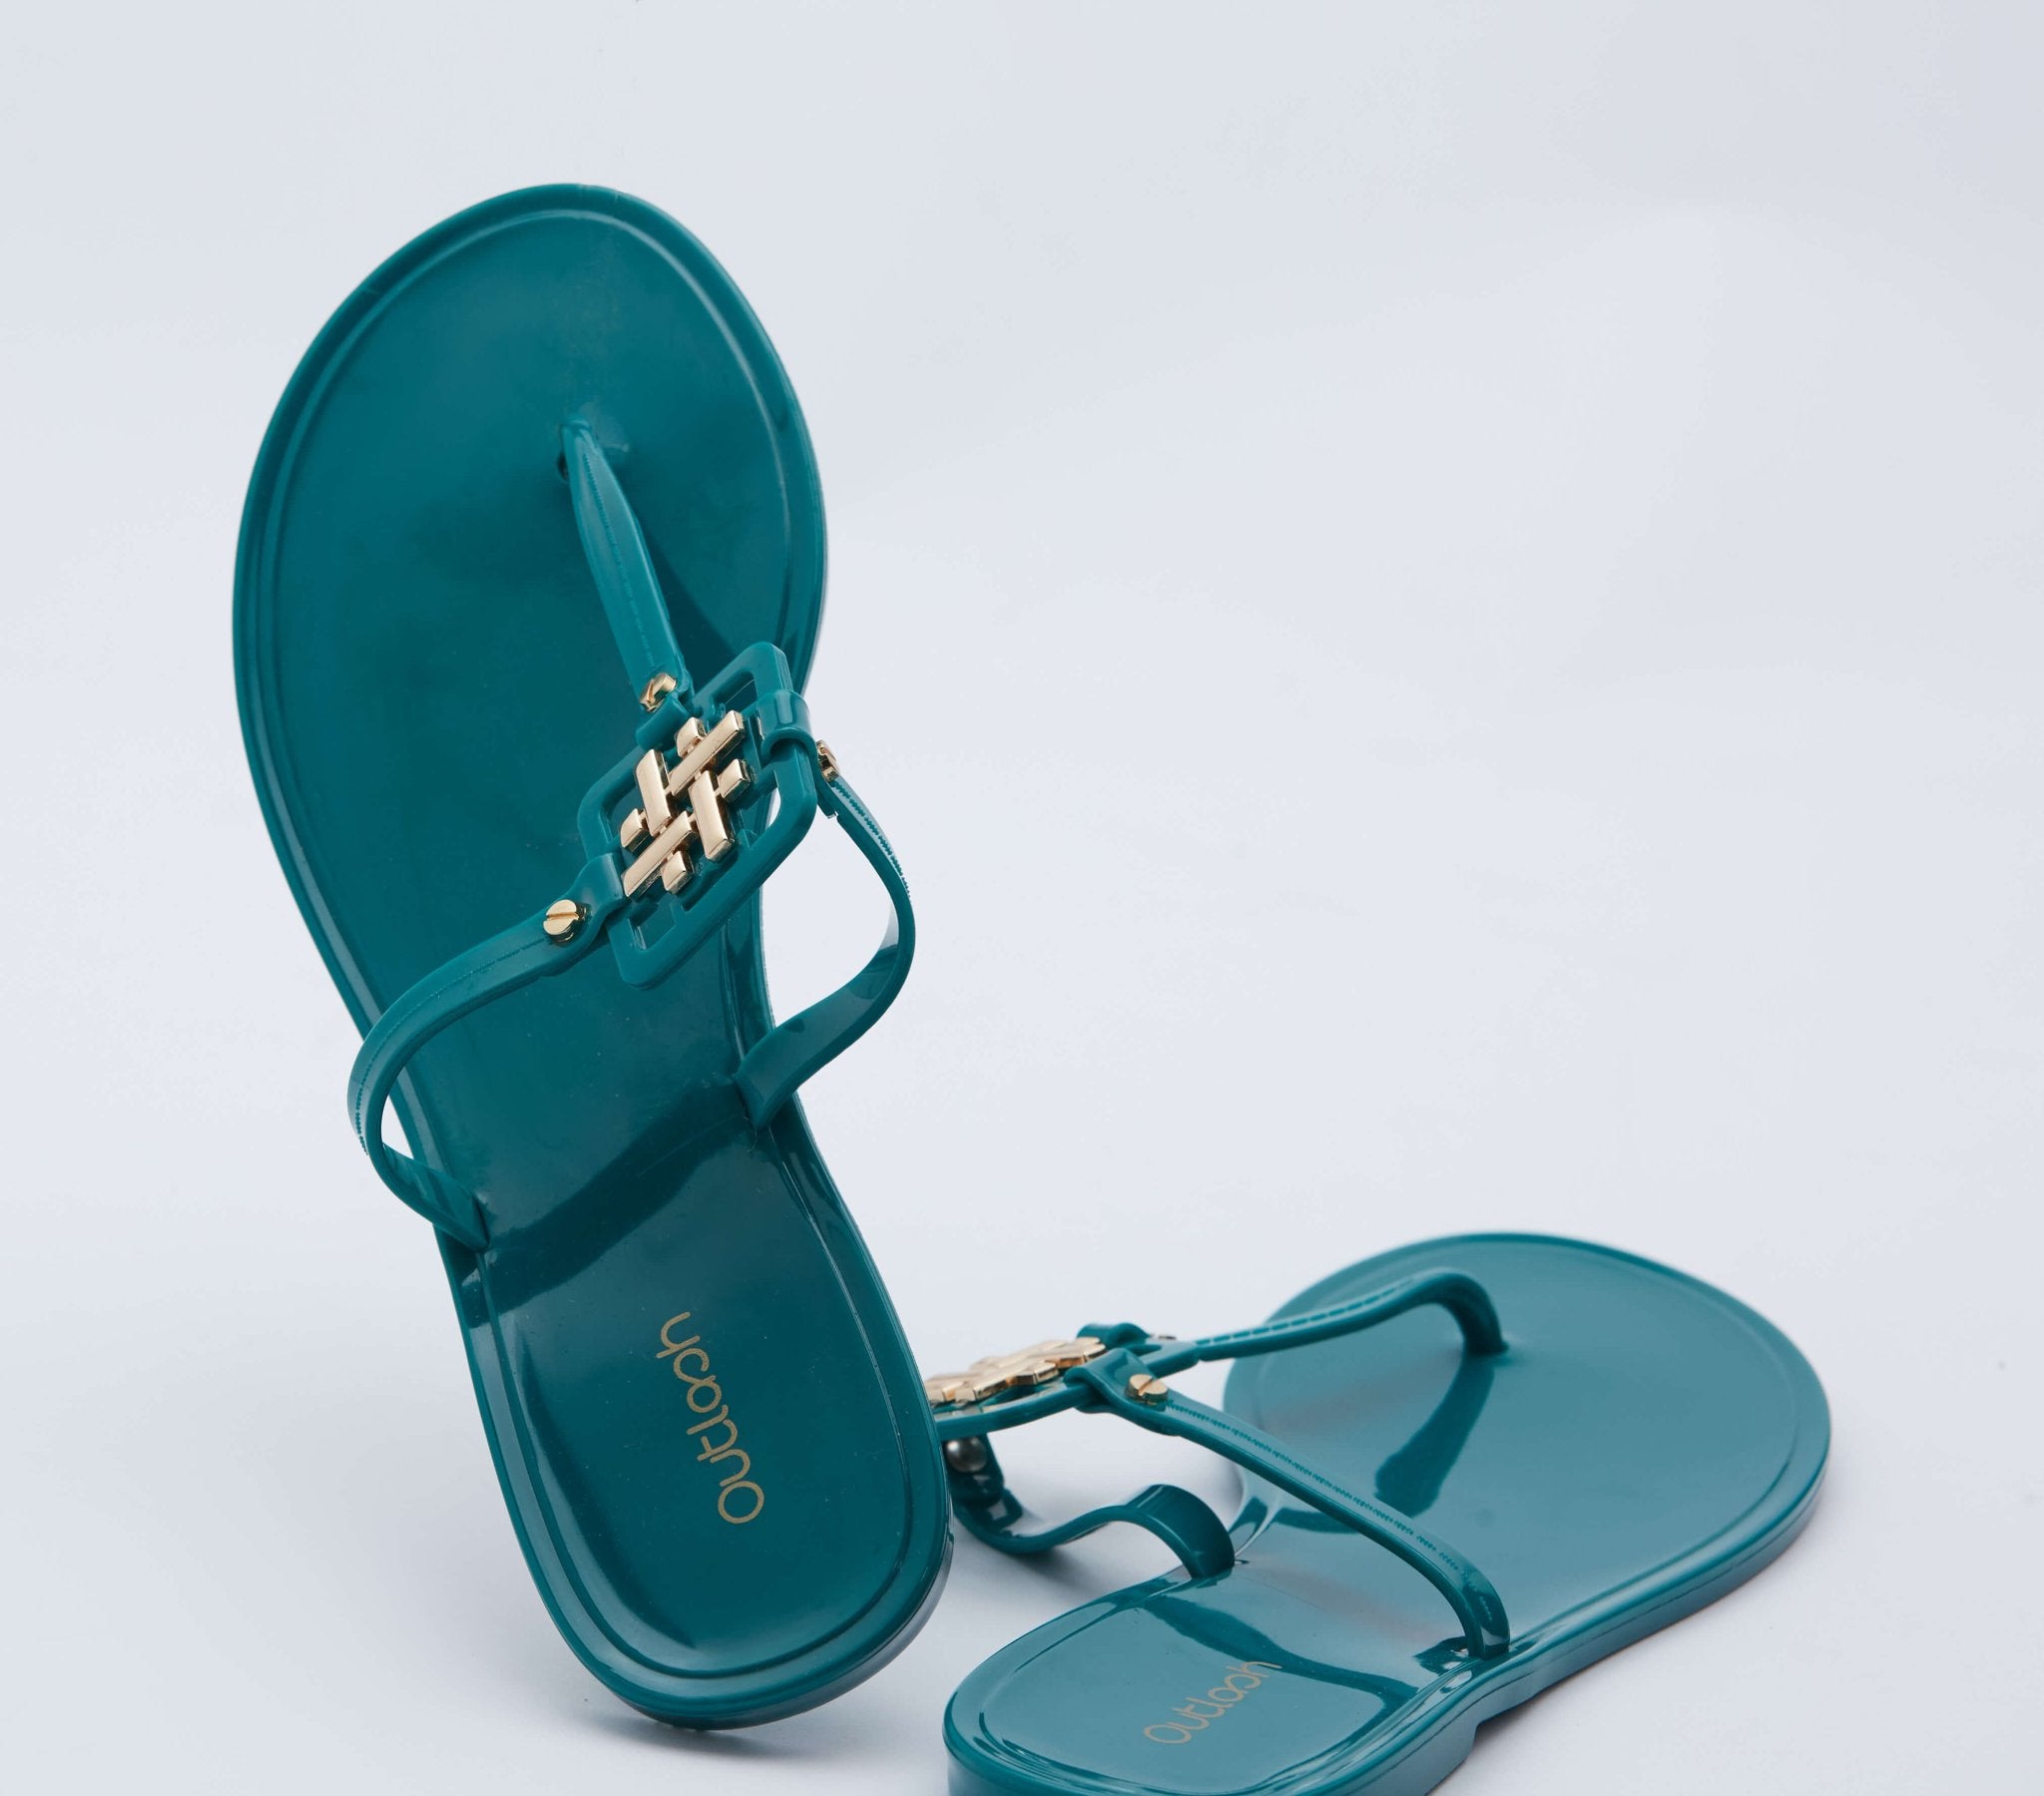 Outslay Jelly Slides in Green - Outlash brand